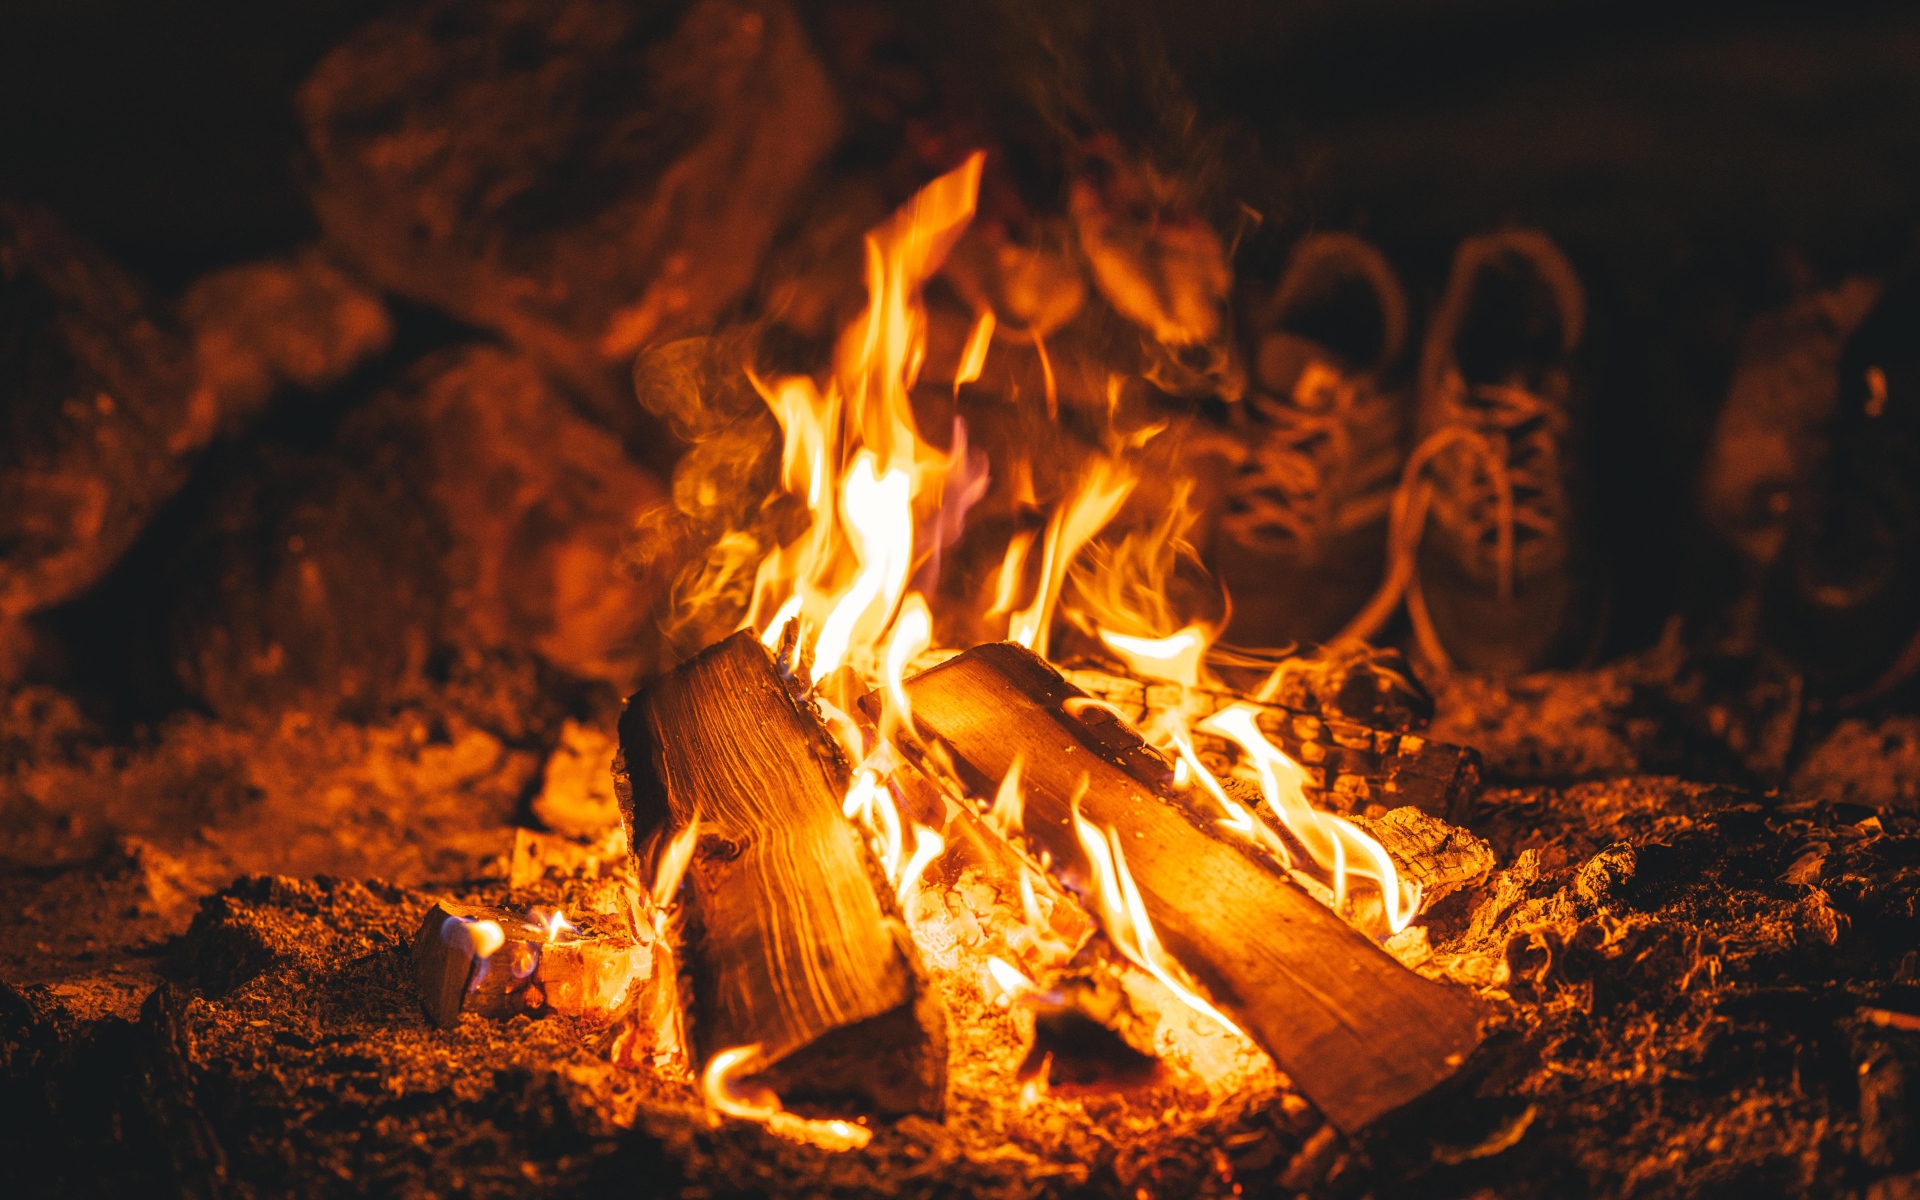 Firewood lies in the bright fire of a fire